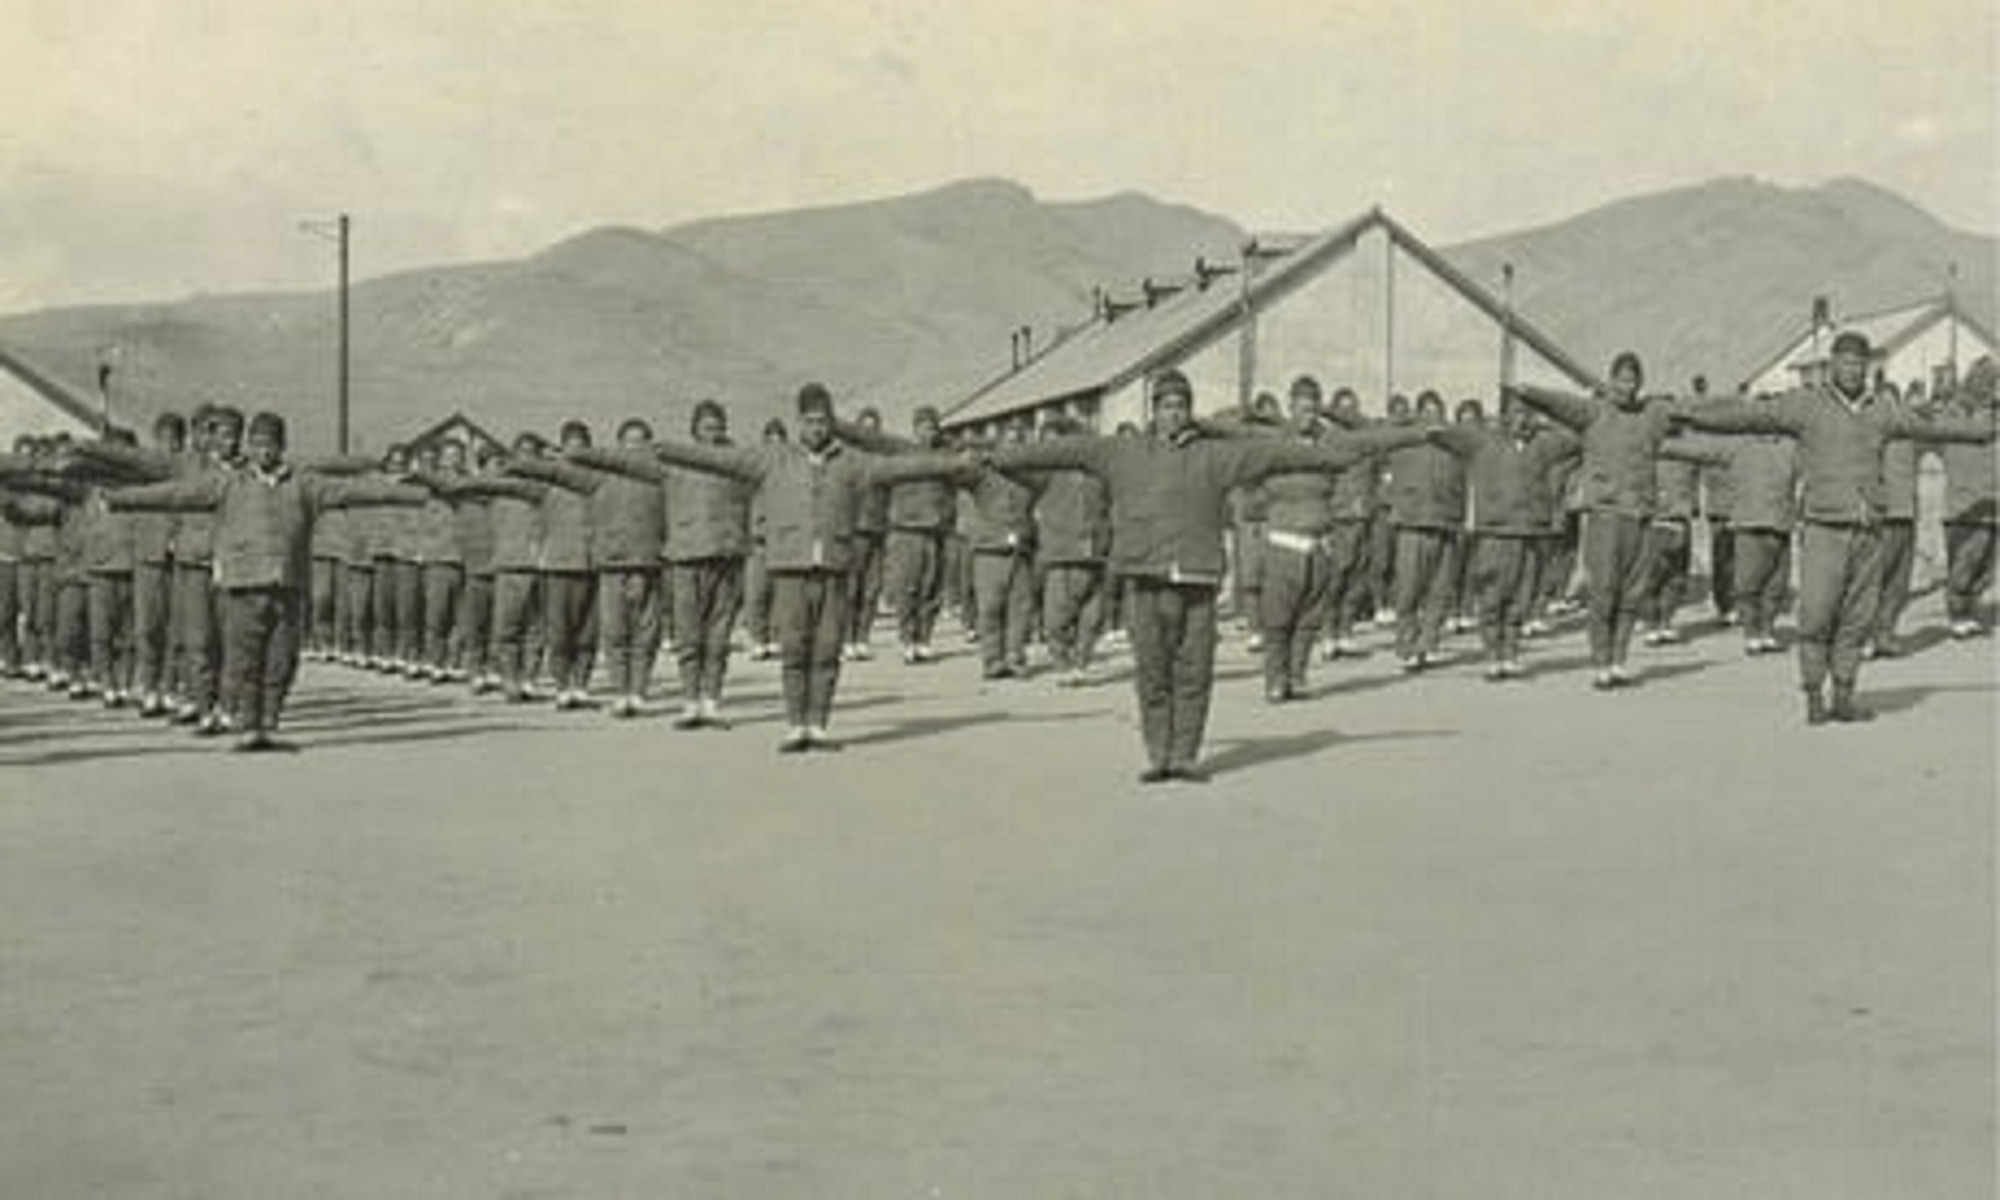 Black and white photograph showing Chineses workers excercising on a camp